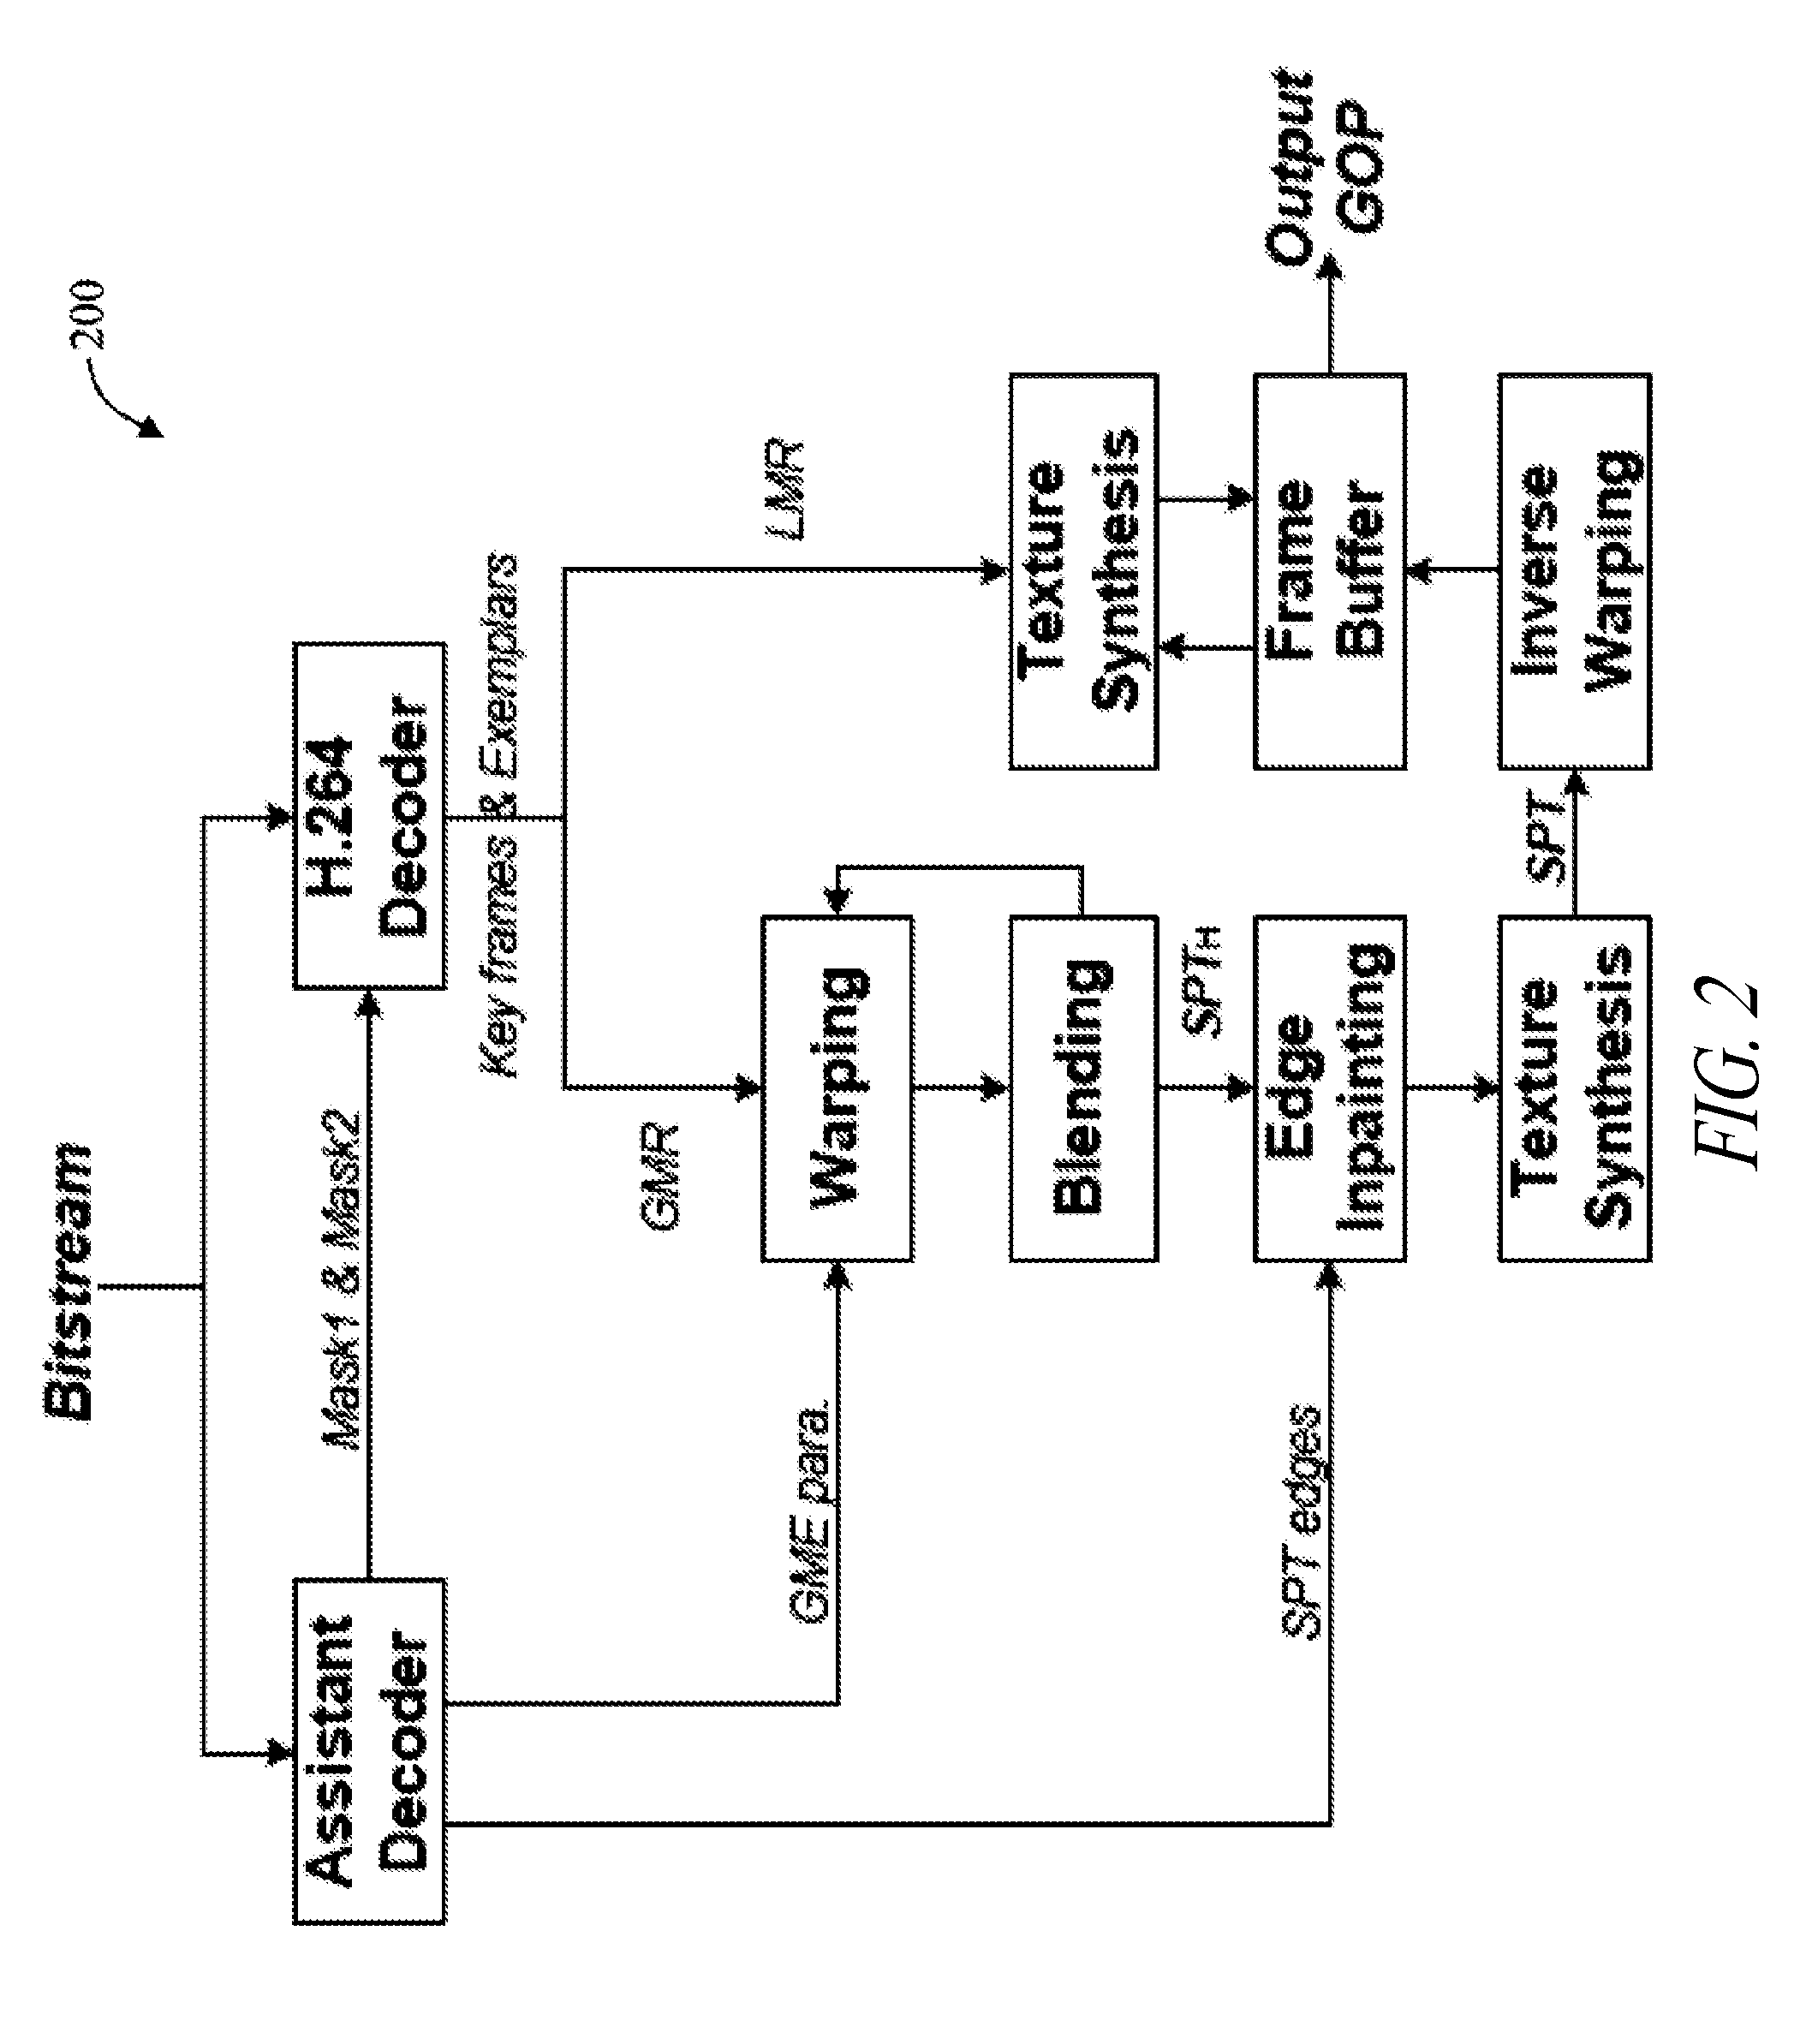 System and method for object based parametric video coding